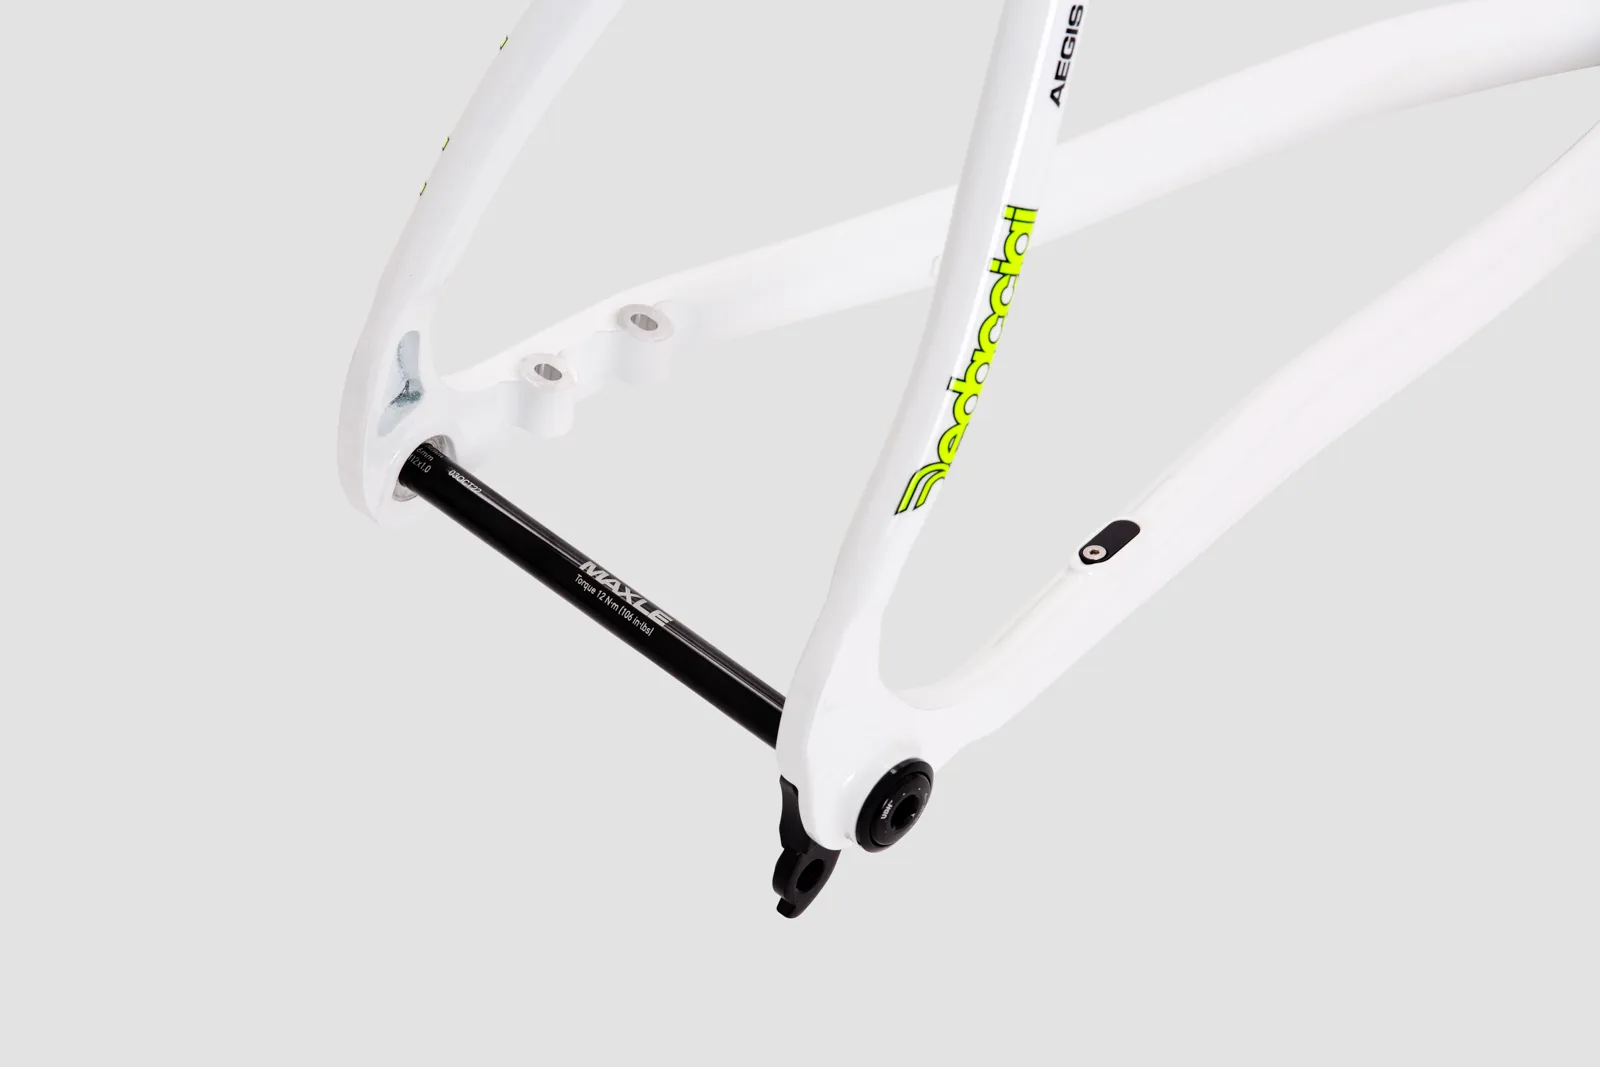 Stichsage Cyclocross Frame - Dropouts